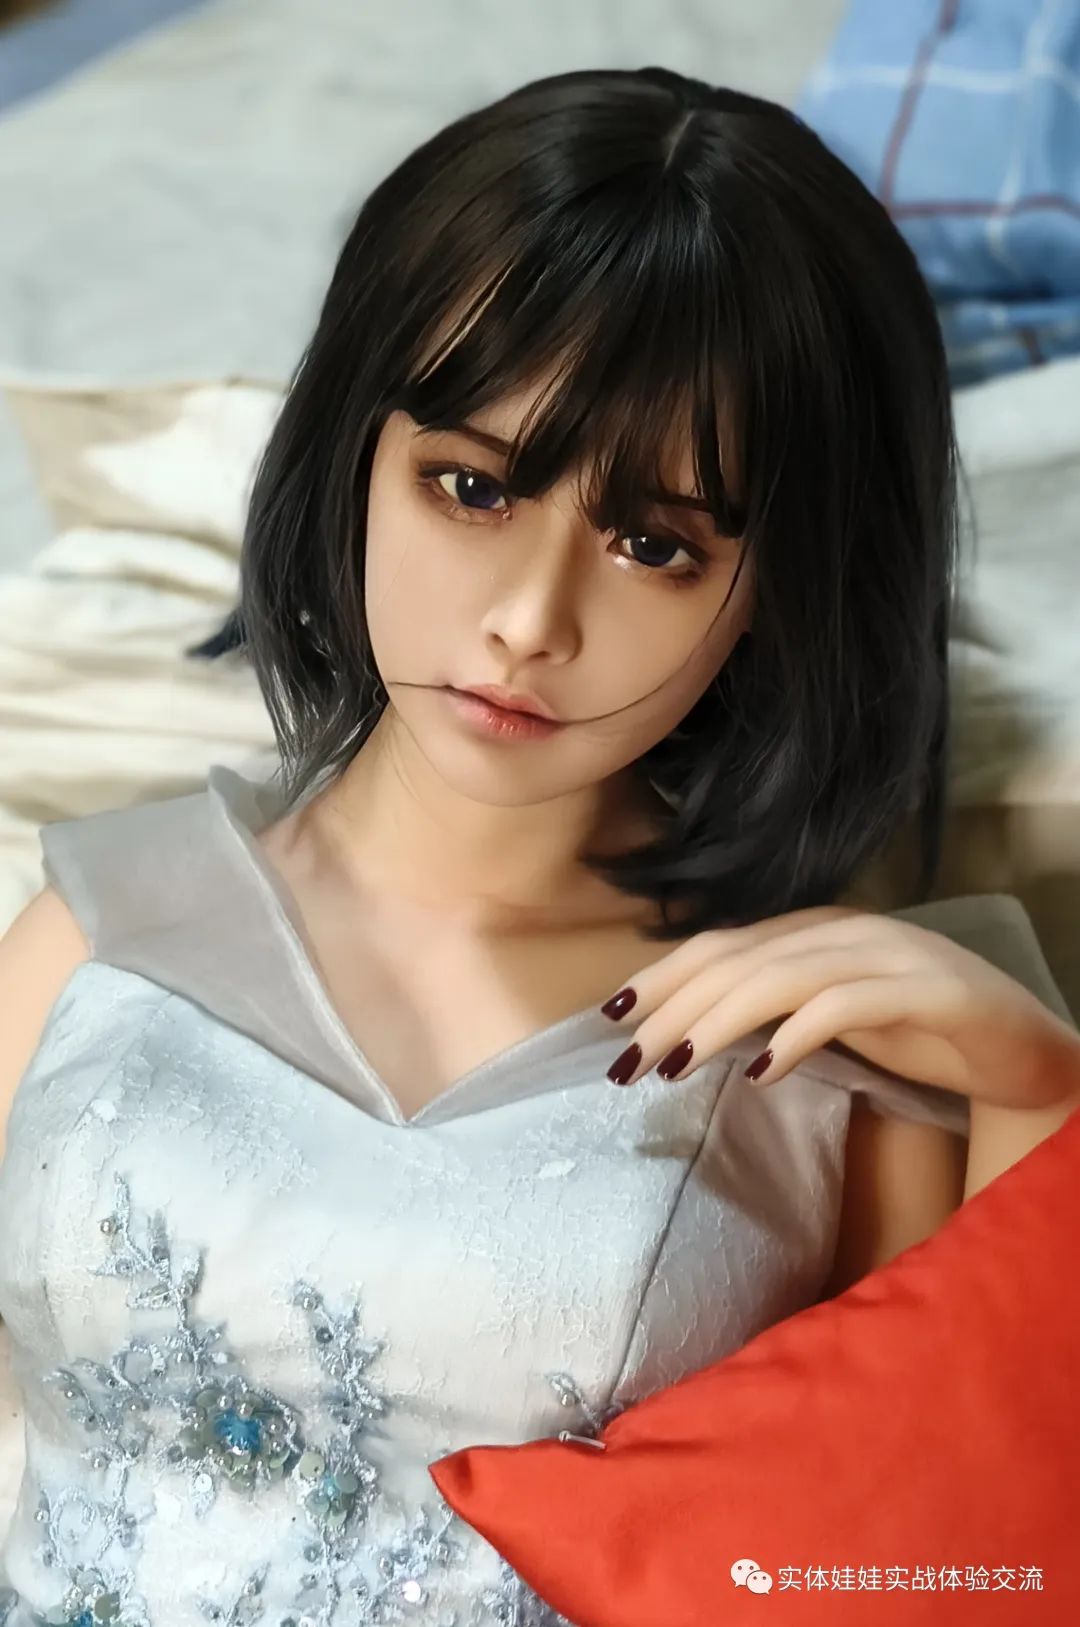 How to make a homemade physical doll?